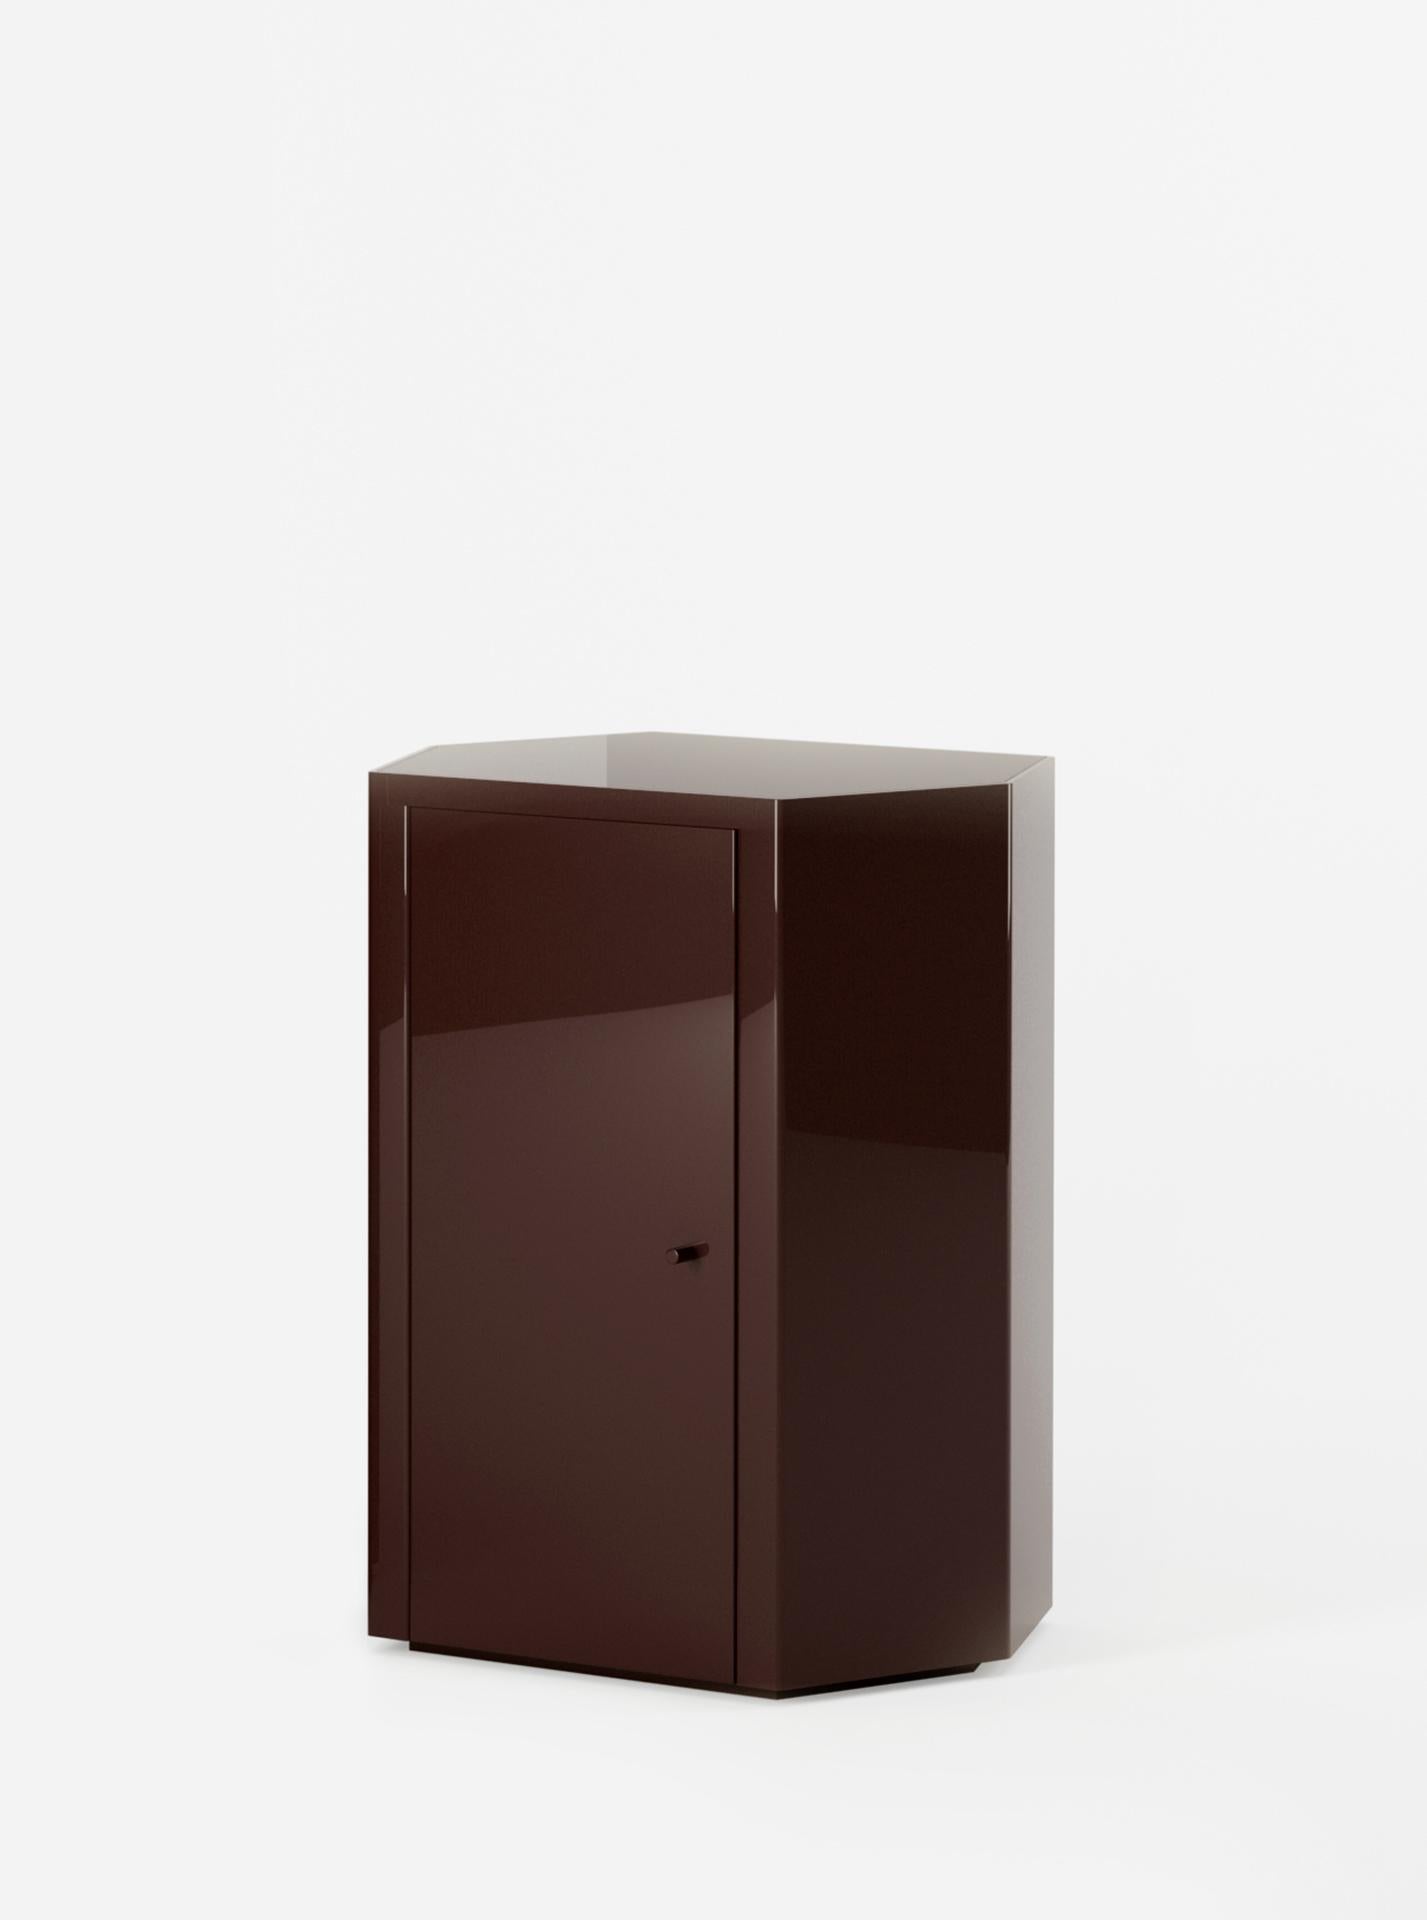 South African Pair of Park Night Stands in Espresso Brown Lacquer by Yaniv Chen for Lemon For Sale